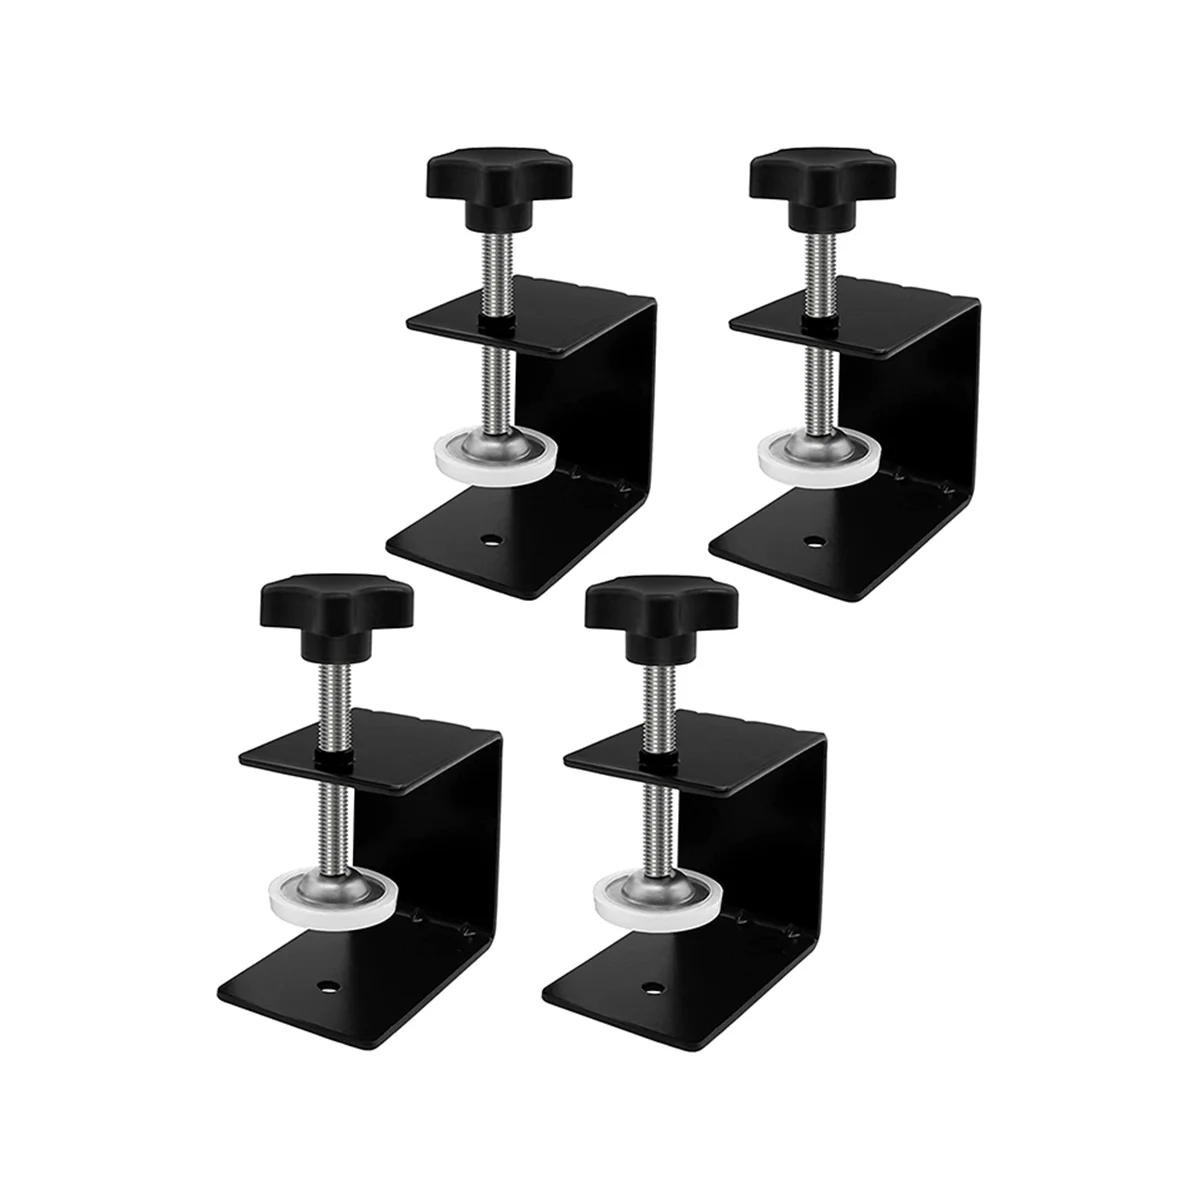 

Drawer Front Panel Installation Clamp Hardware Jig C Clamp 3mm Thicker Drawer Drill Hole Guide U Clamp(4 Pack)